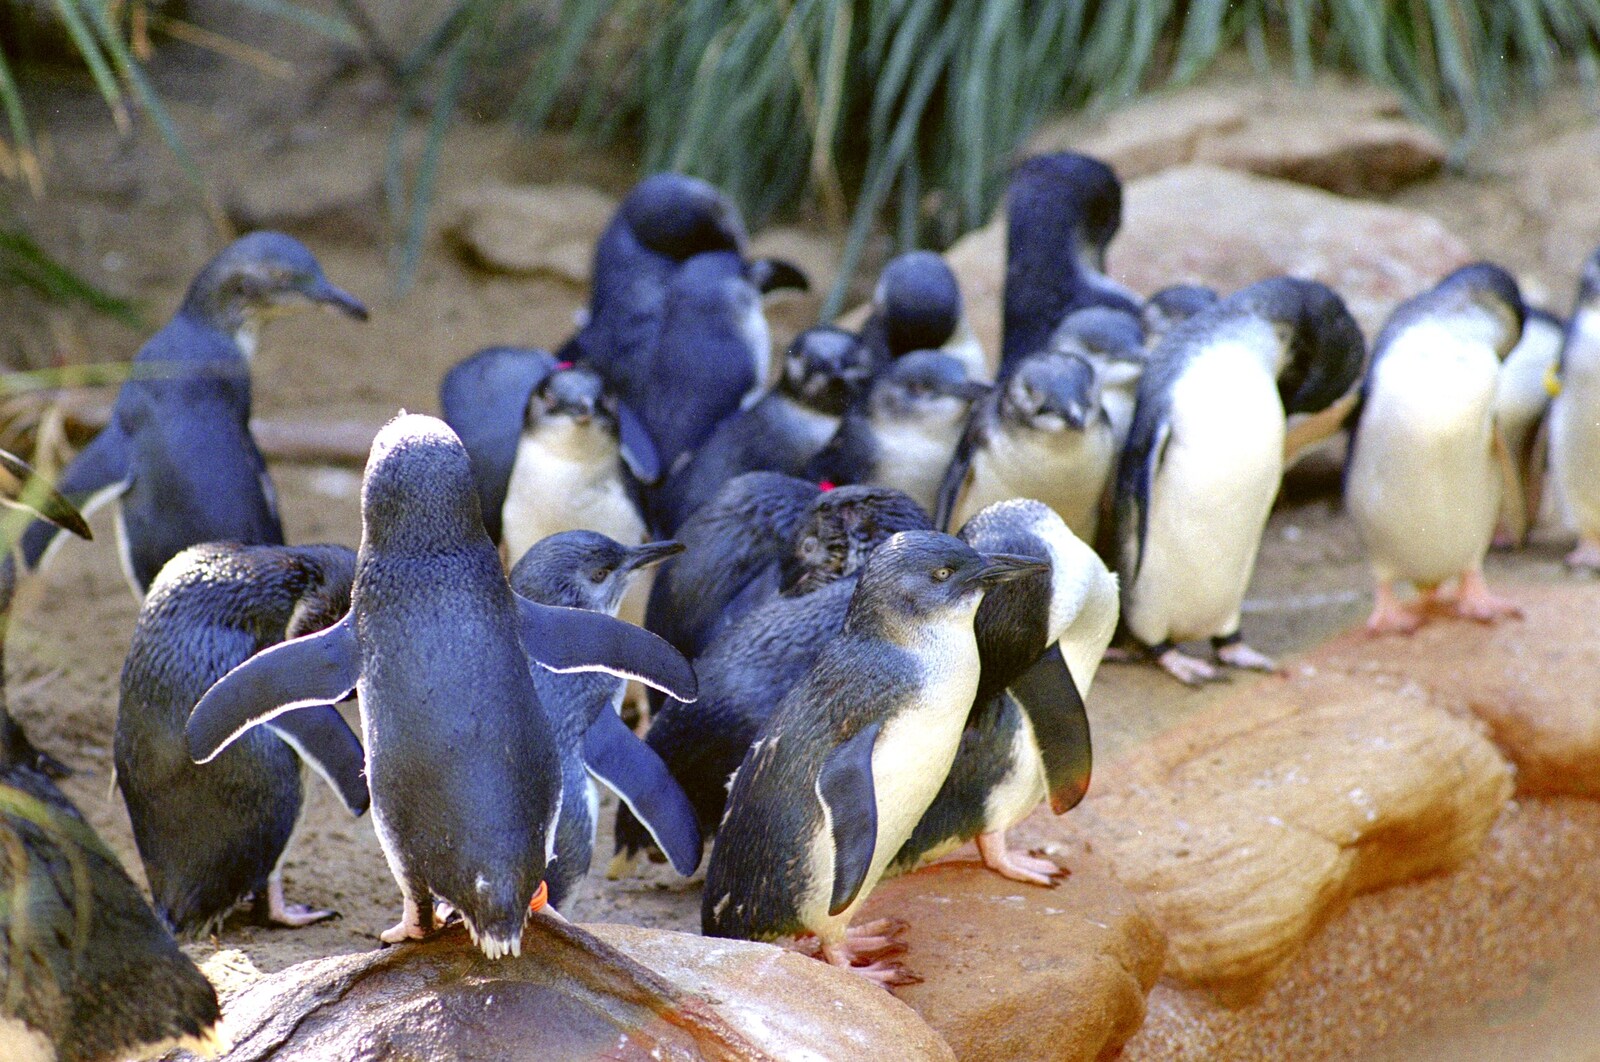 Some cute penguins from A Trip to the Zoo, Sydney, Australia - 7th April 2000